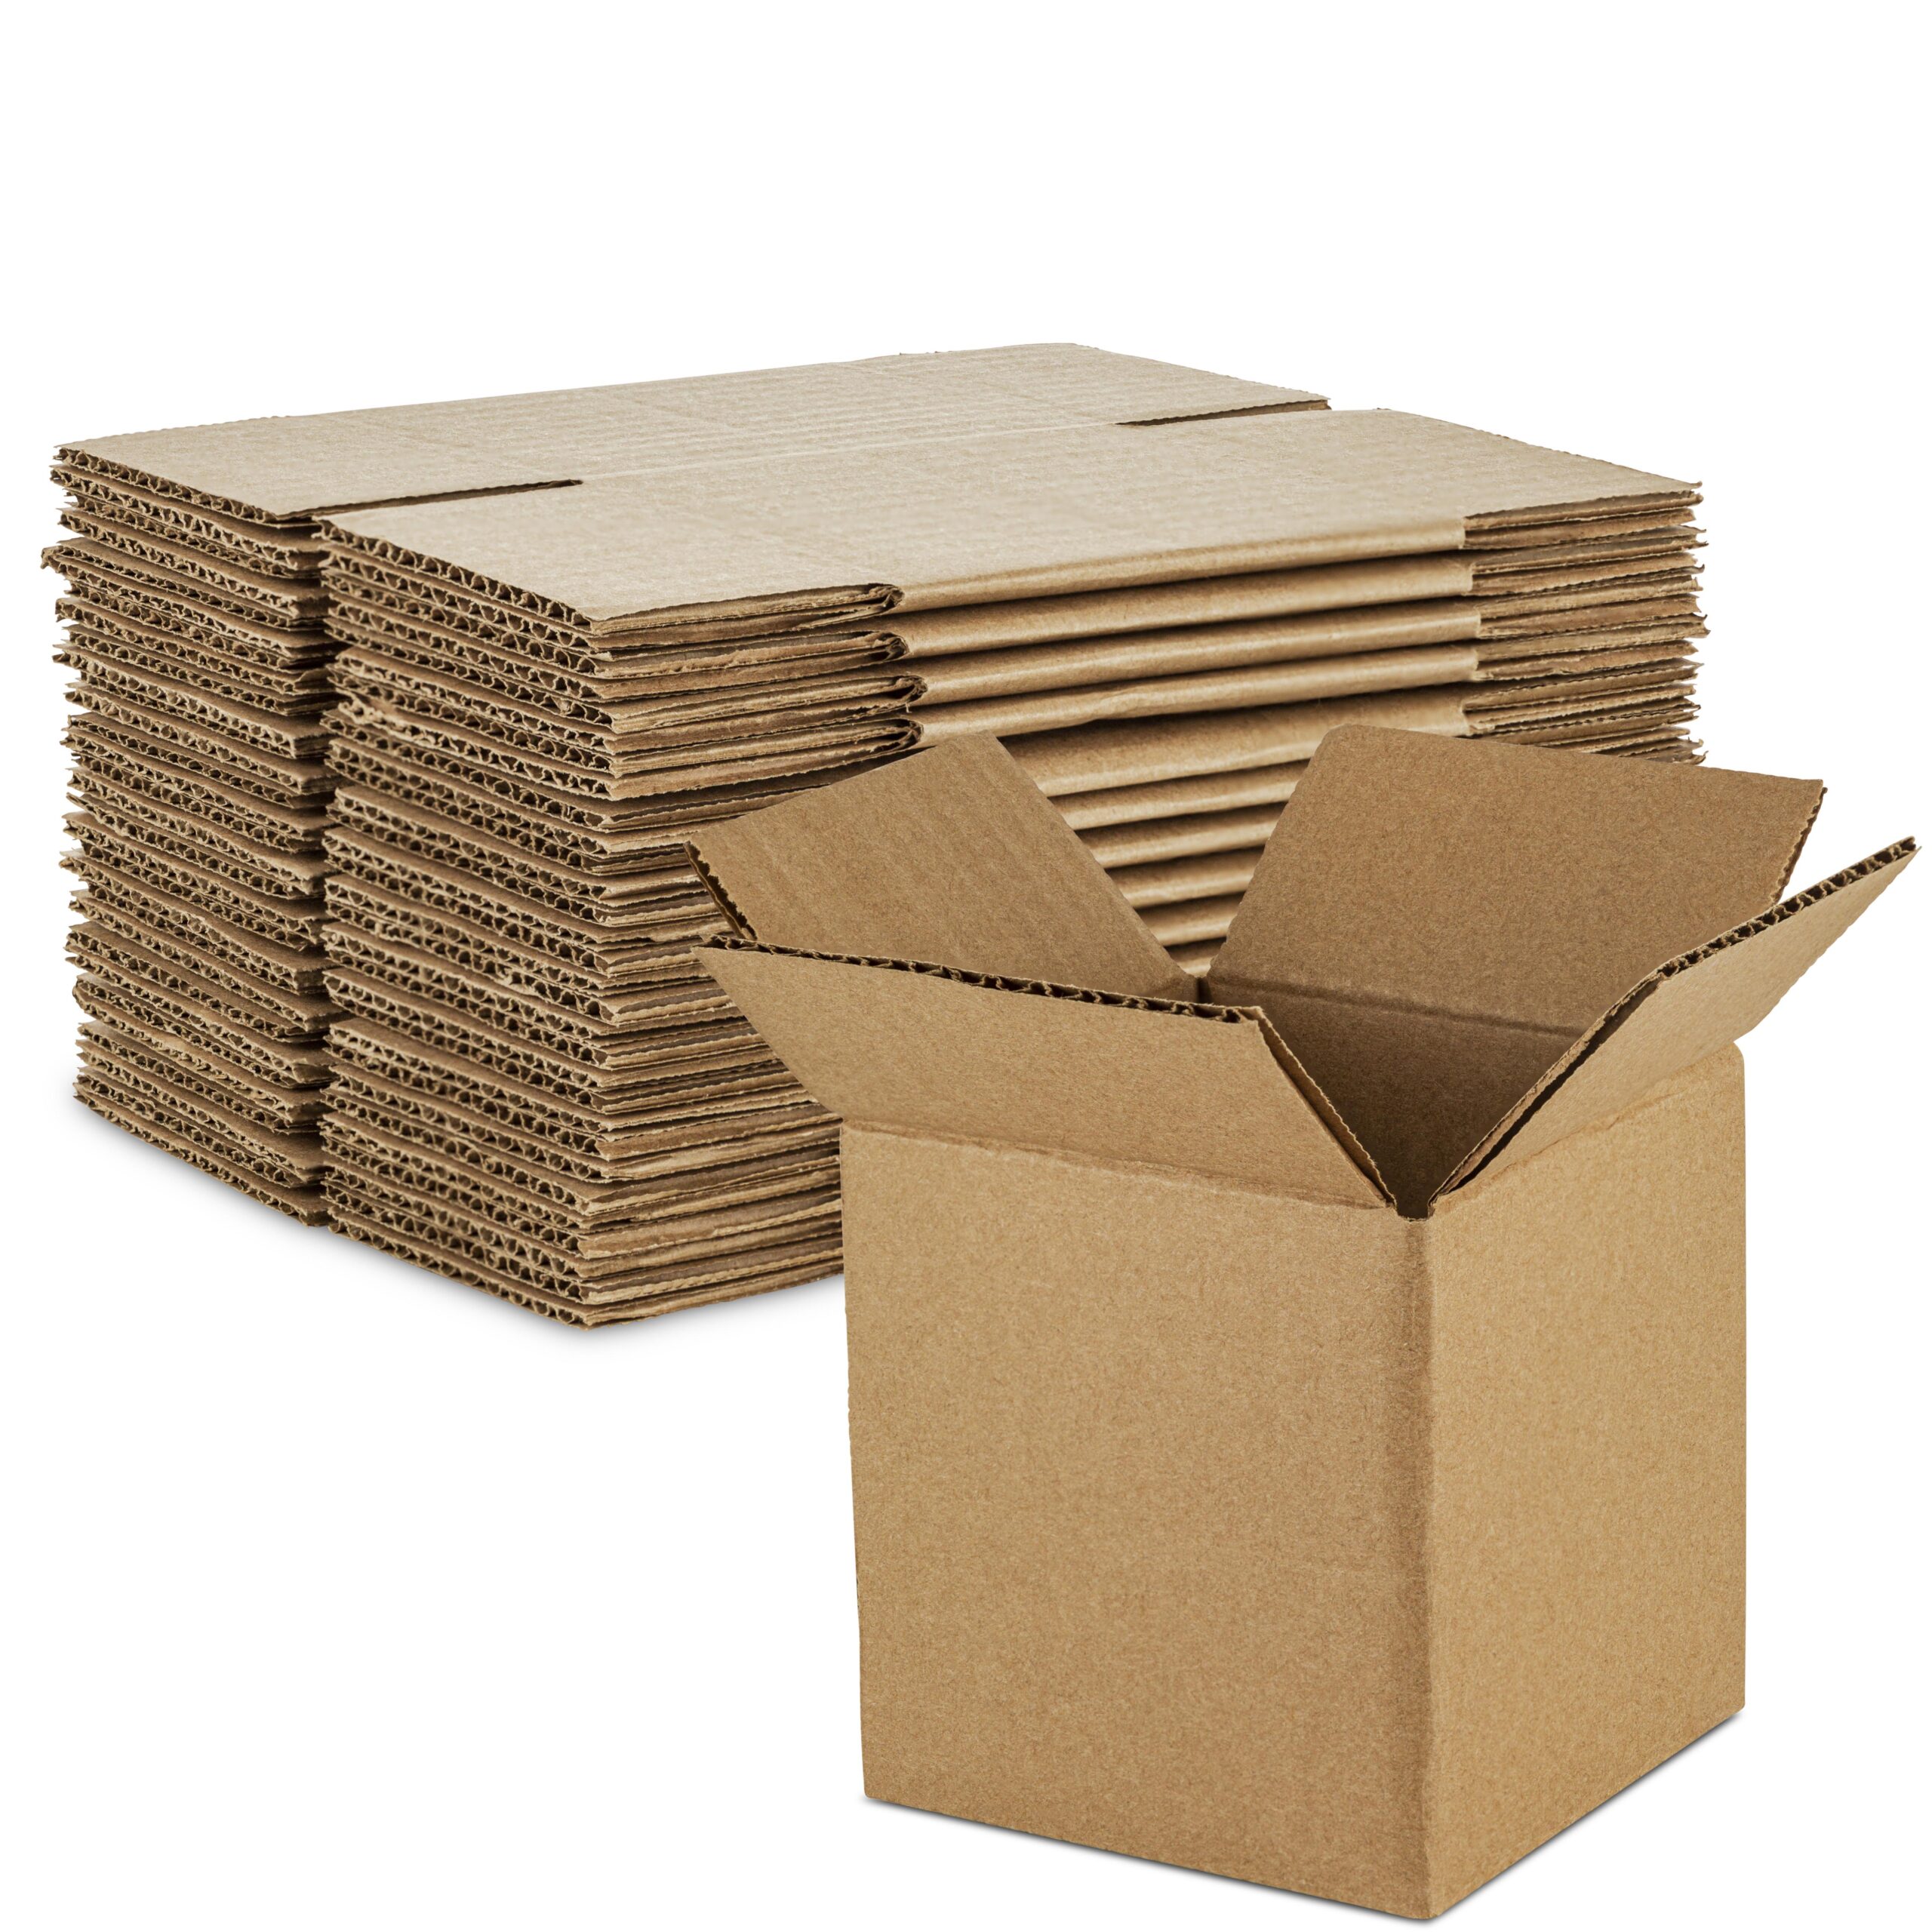 Mailing Shipping Tubes, Mailing Containers